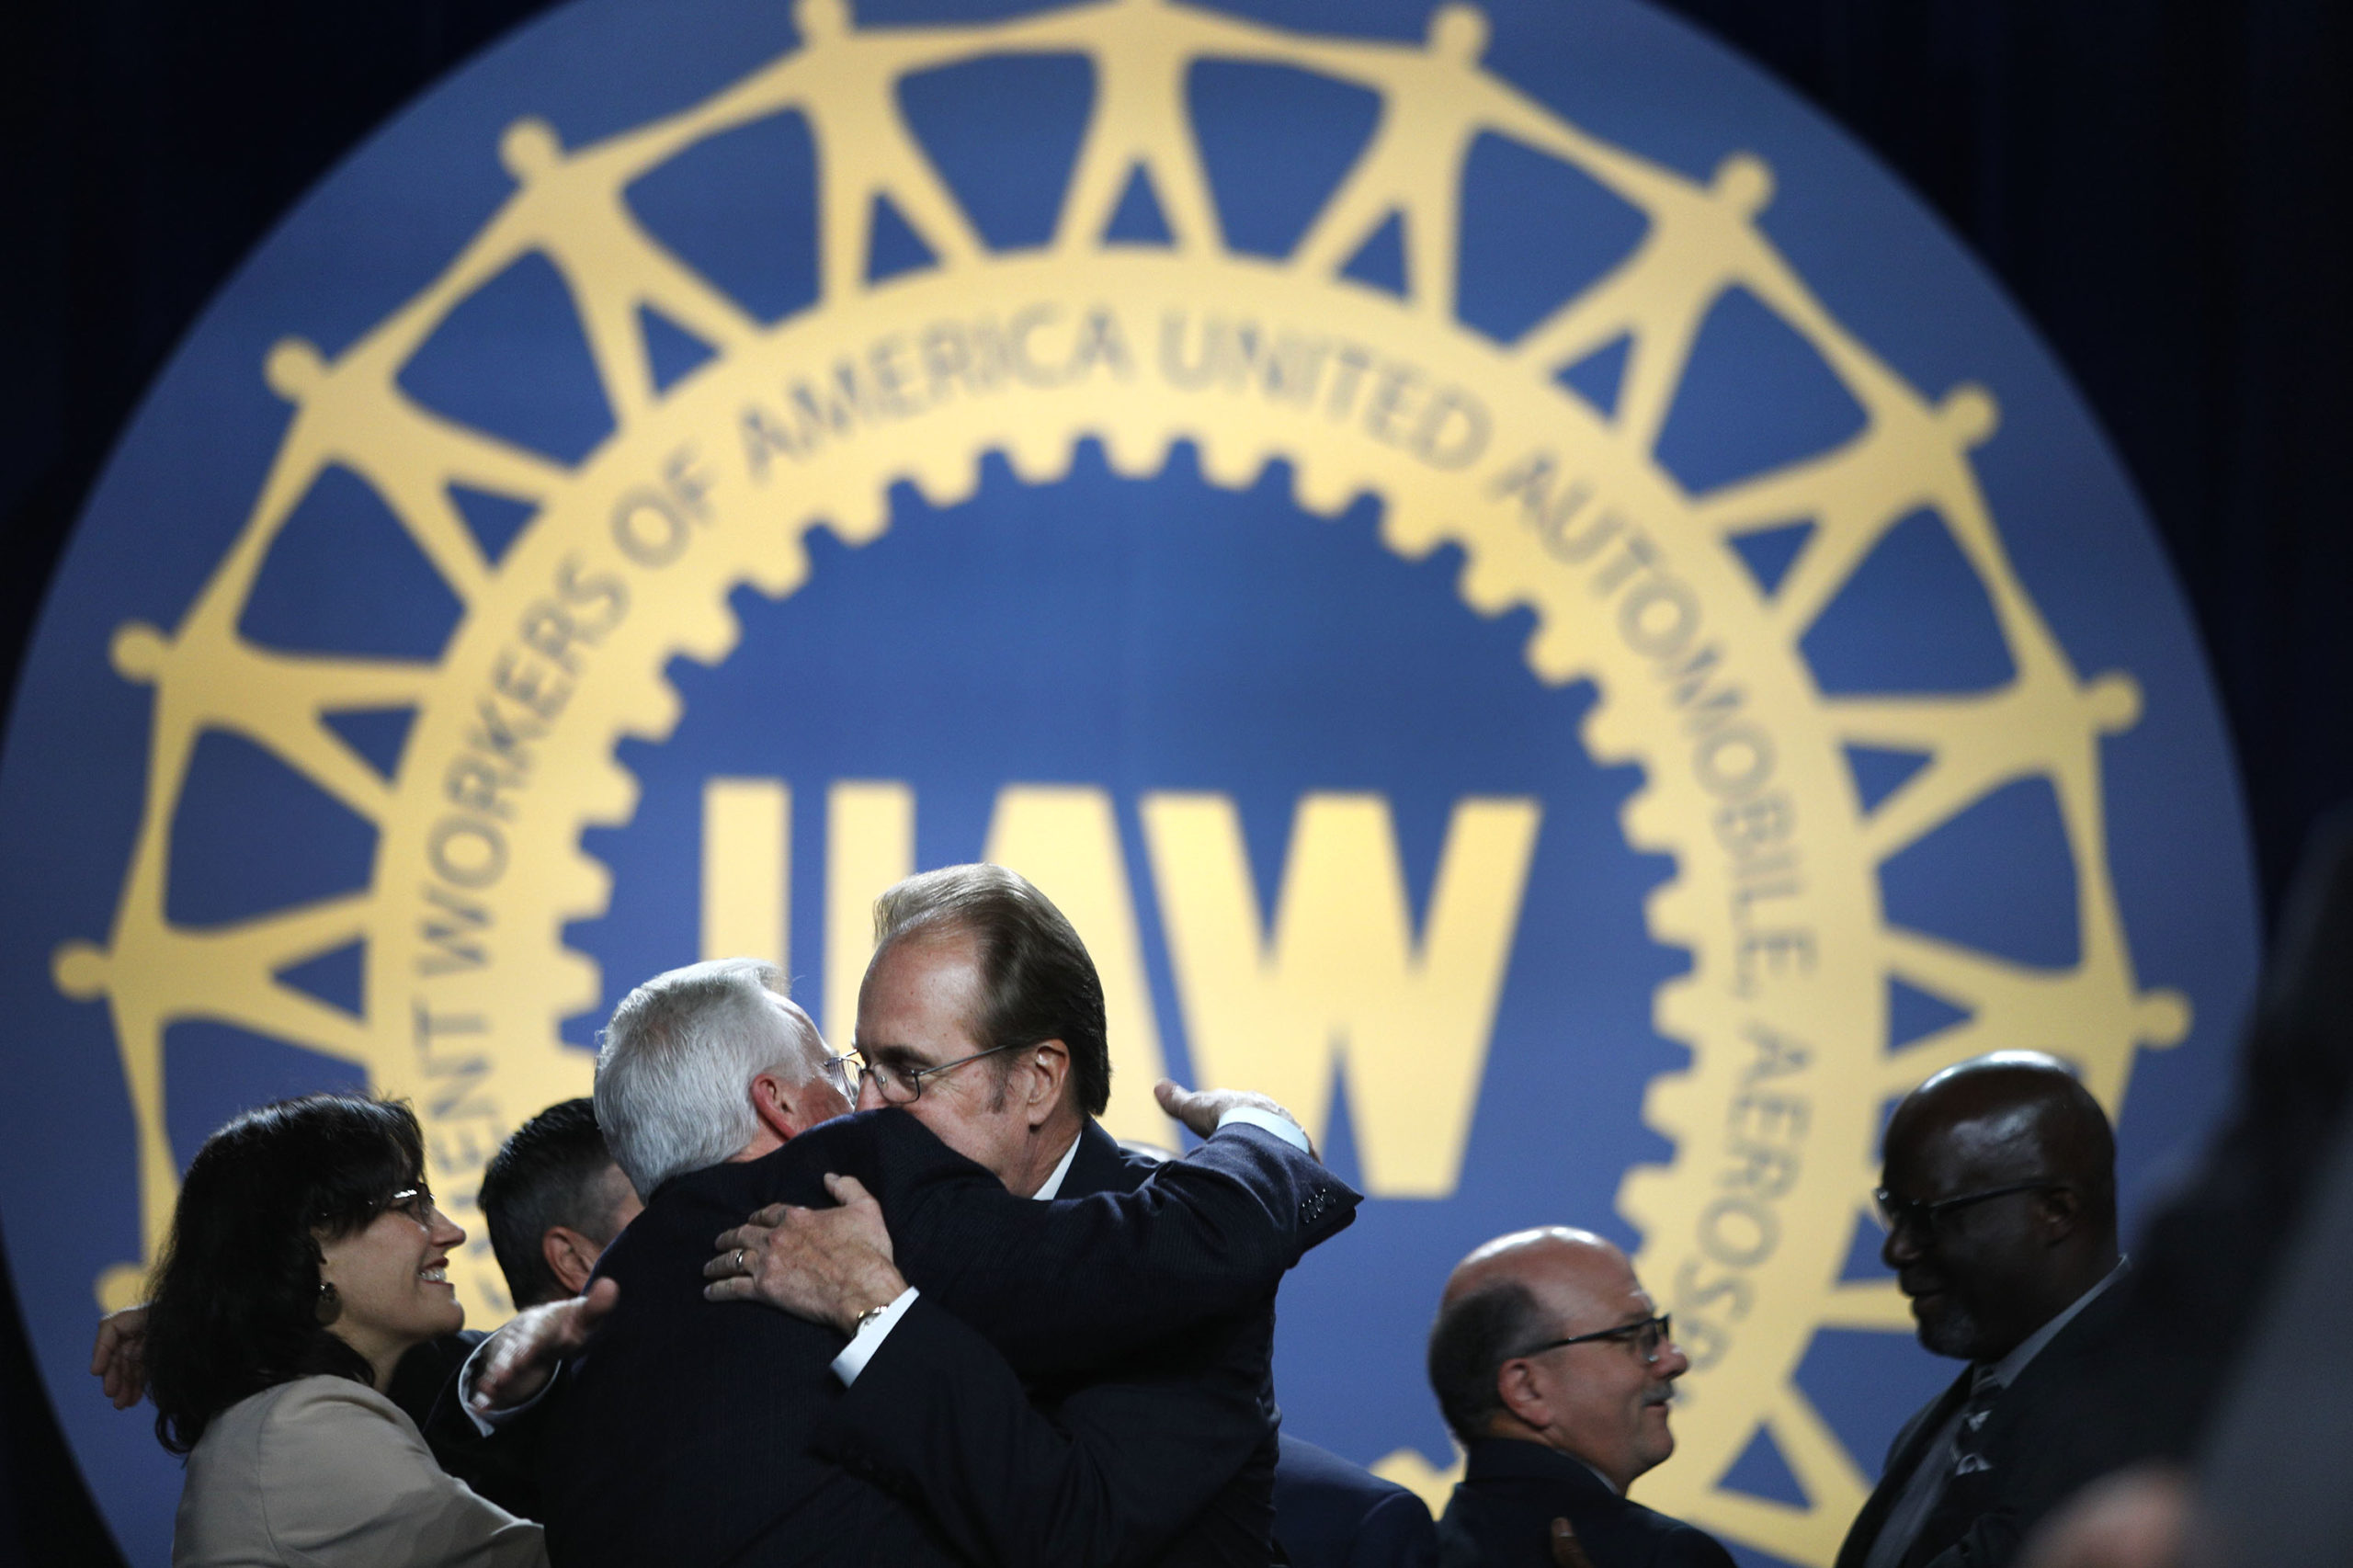 Former UAW president Dennis Williams embraces Gary Jones after Jones was elected the new president at the 37th UAW Constitutional Convention in 2018. (Bill Pugliano/Getty Images)